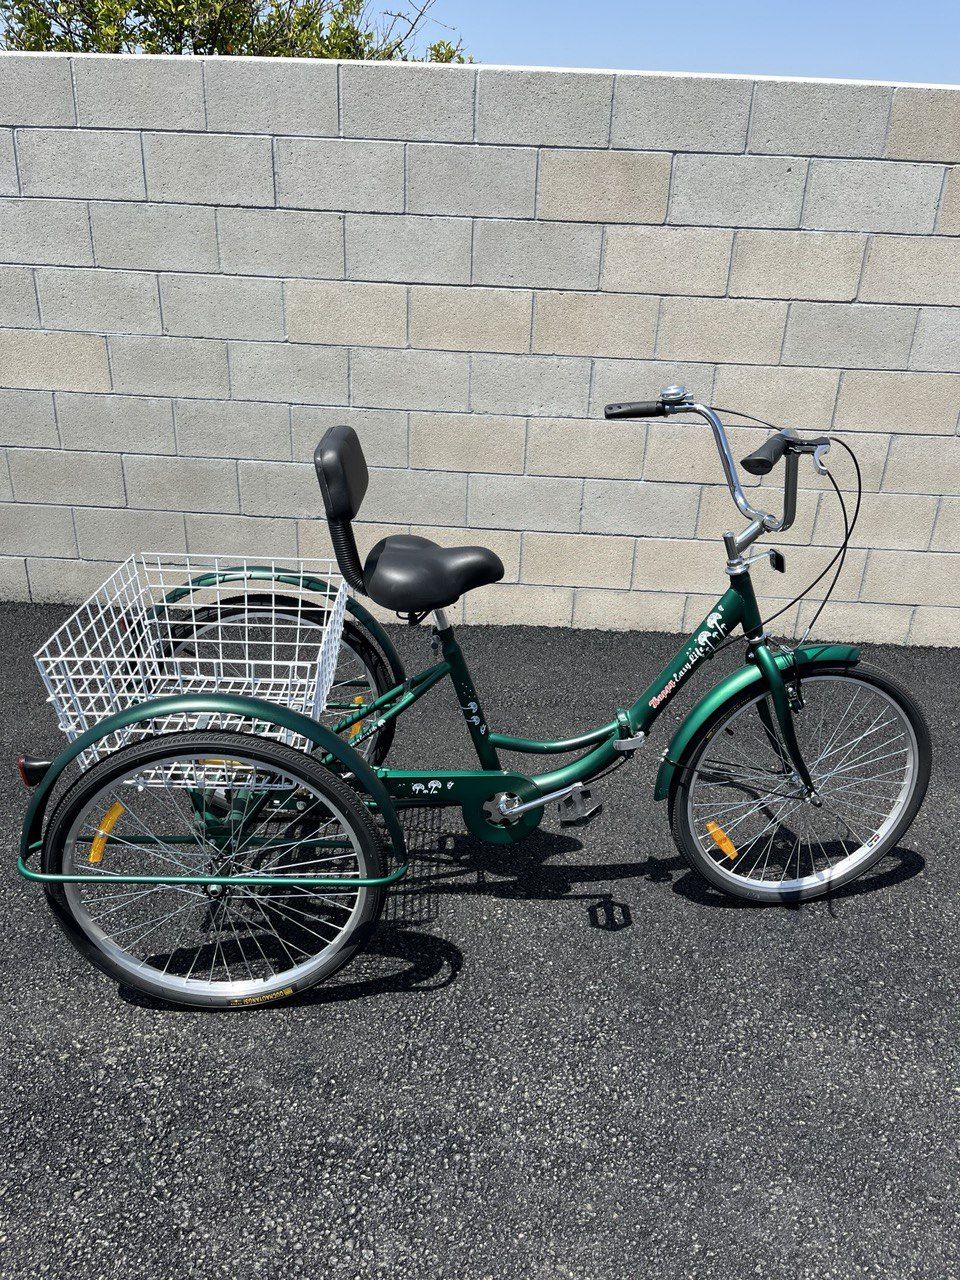 Foldable Adult Tricycle 24 in. 1 Speed Tricycle. PRICE. $225.00 FIRM!!